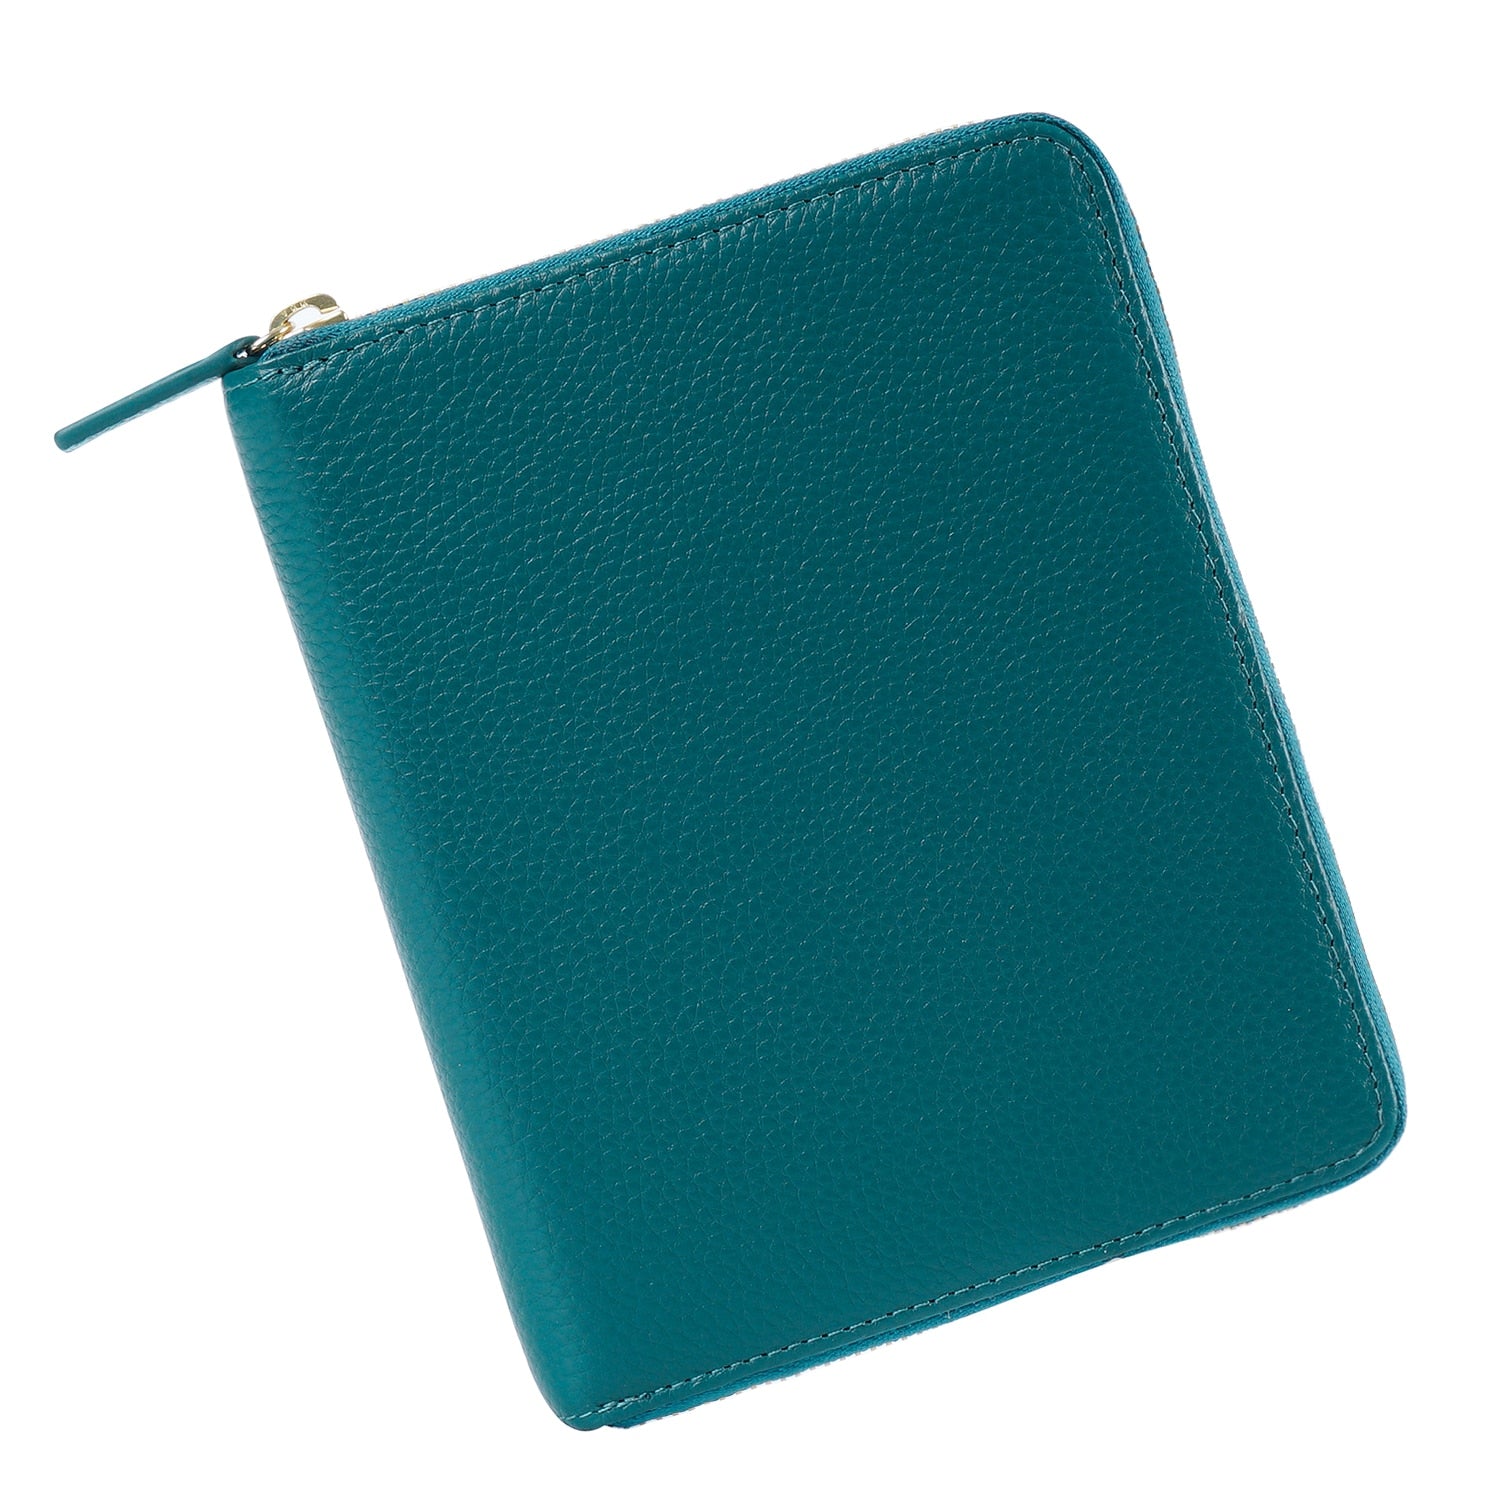 Moterm B6 Zip Cover with Back Pocket (Green)